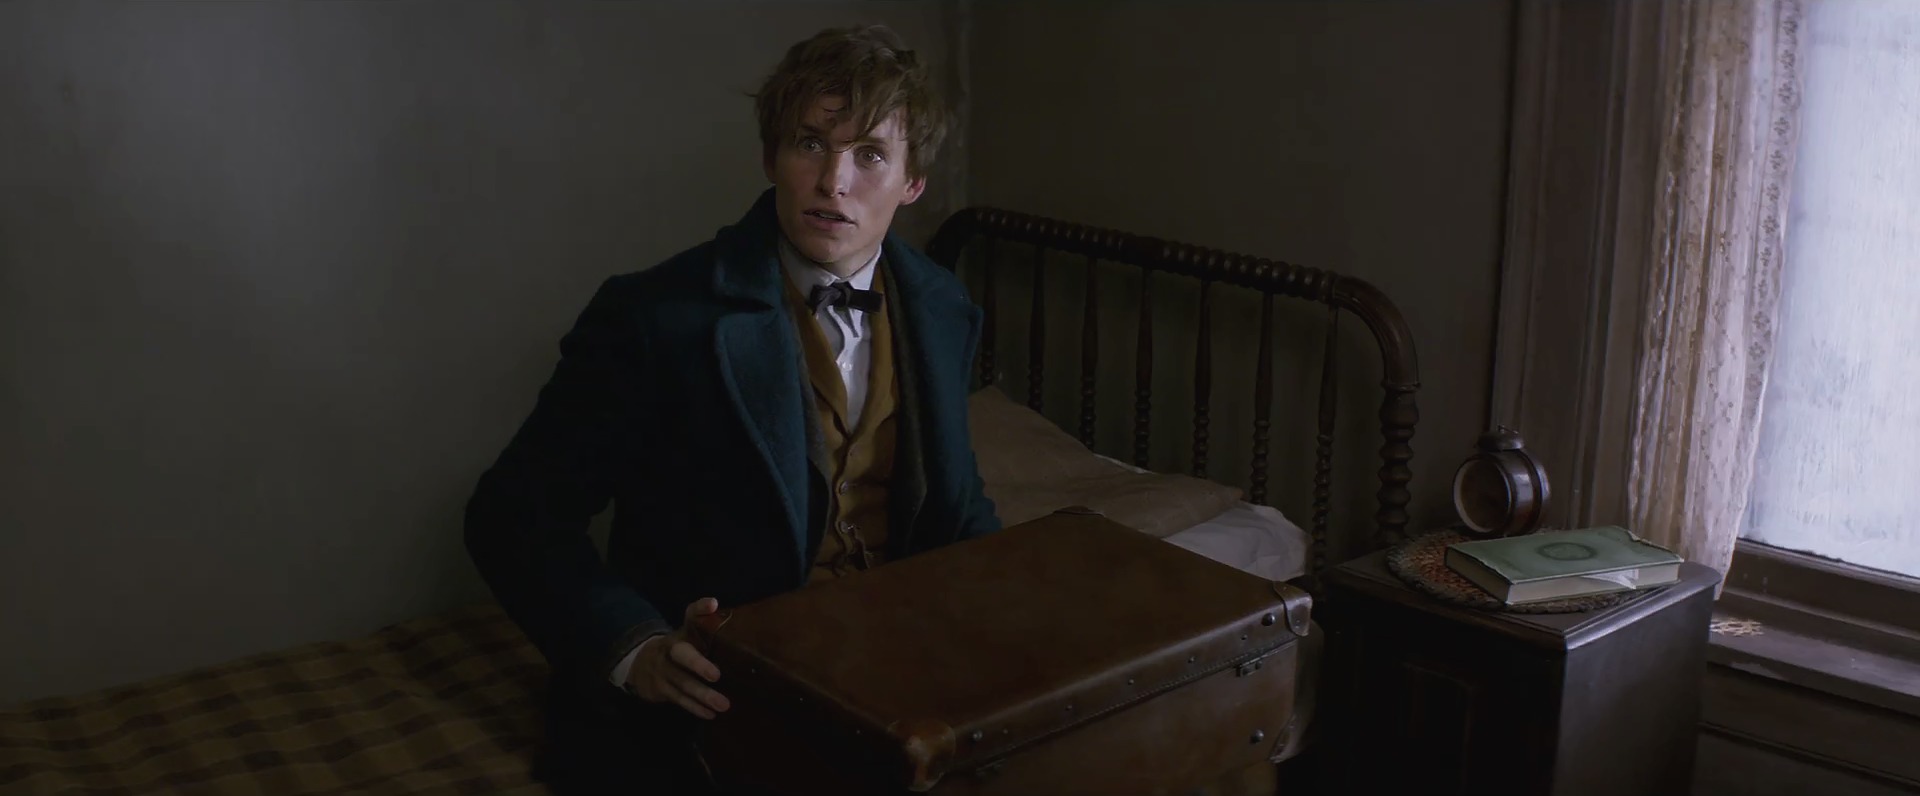 Film Watch Fantastic Beasts And Where To Find Them Online 2016 1080P